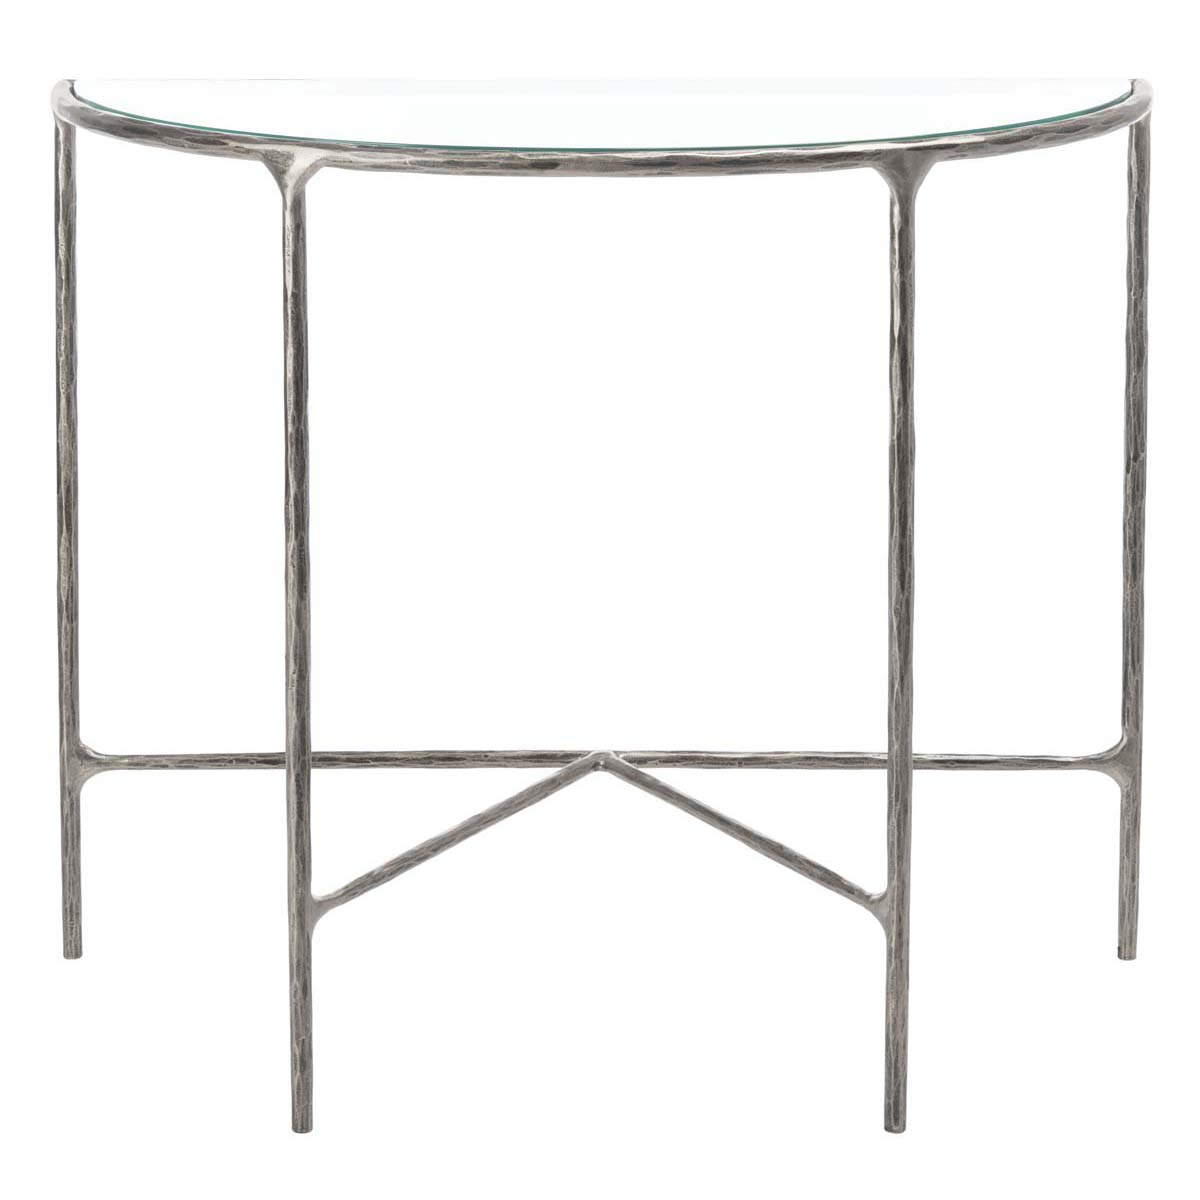 Safavieh Couture Jessa Forged Metal Console Tab - Silver